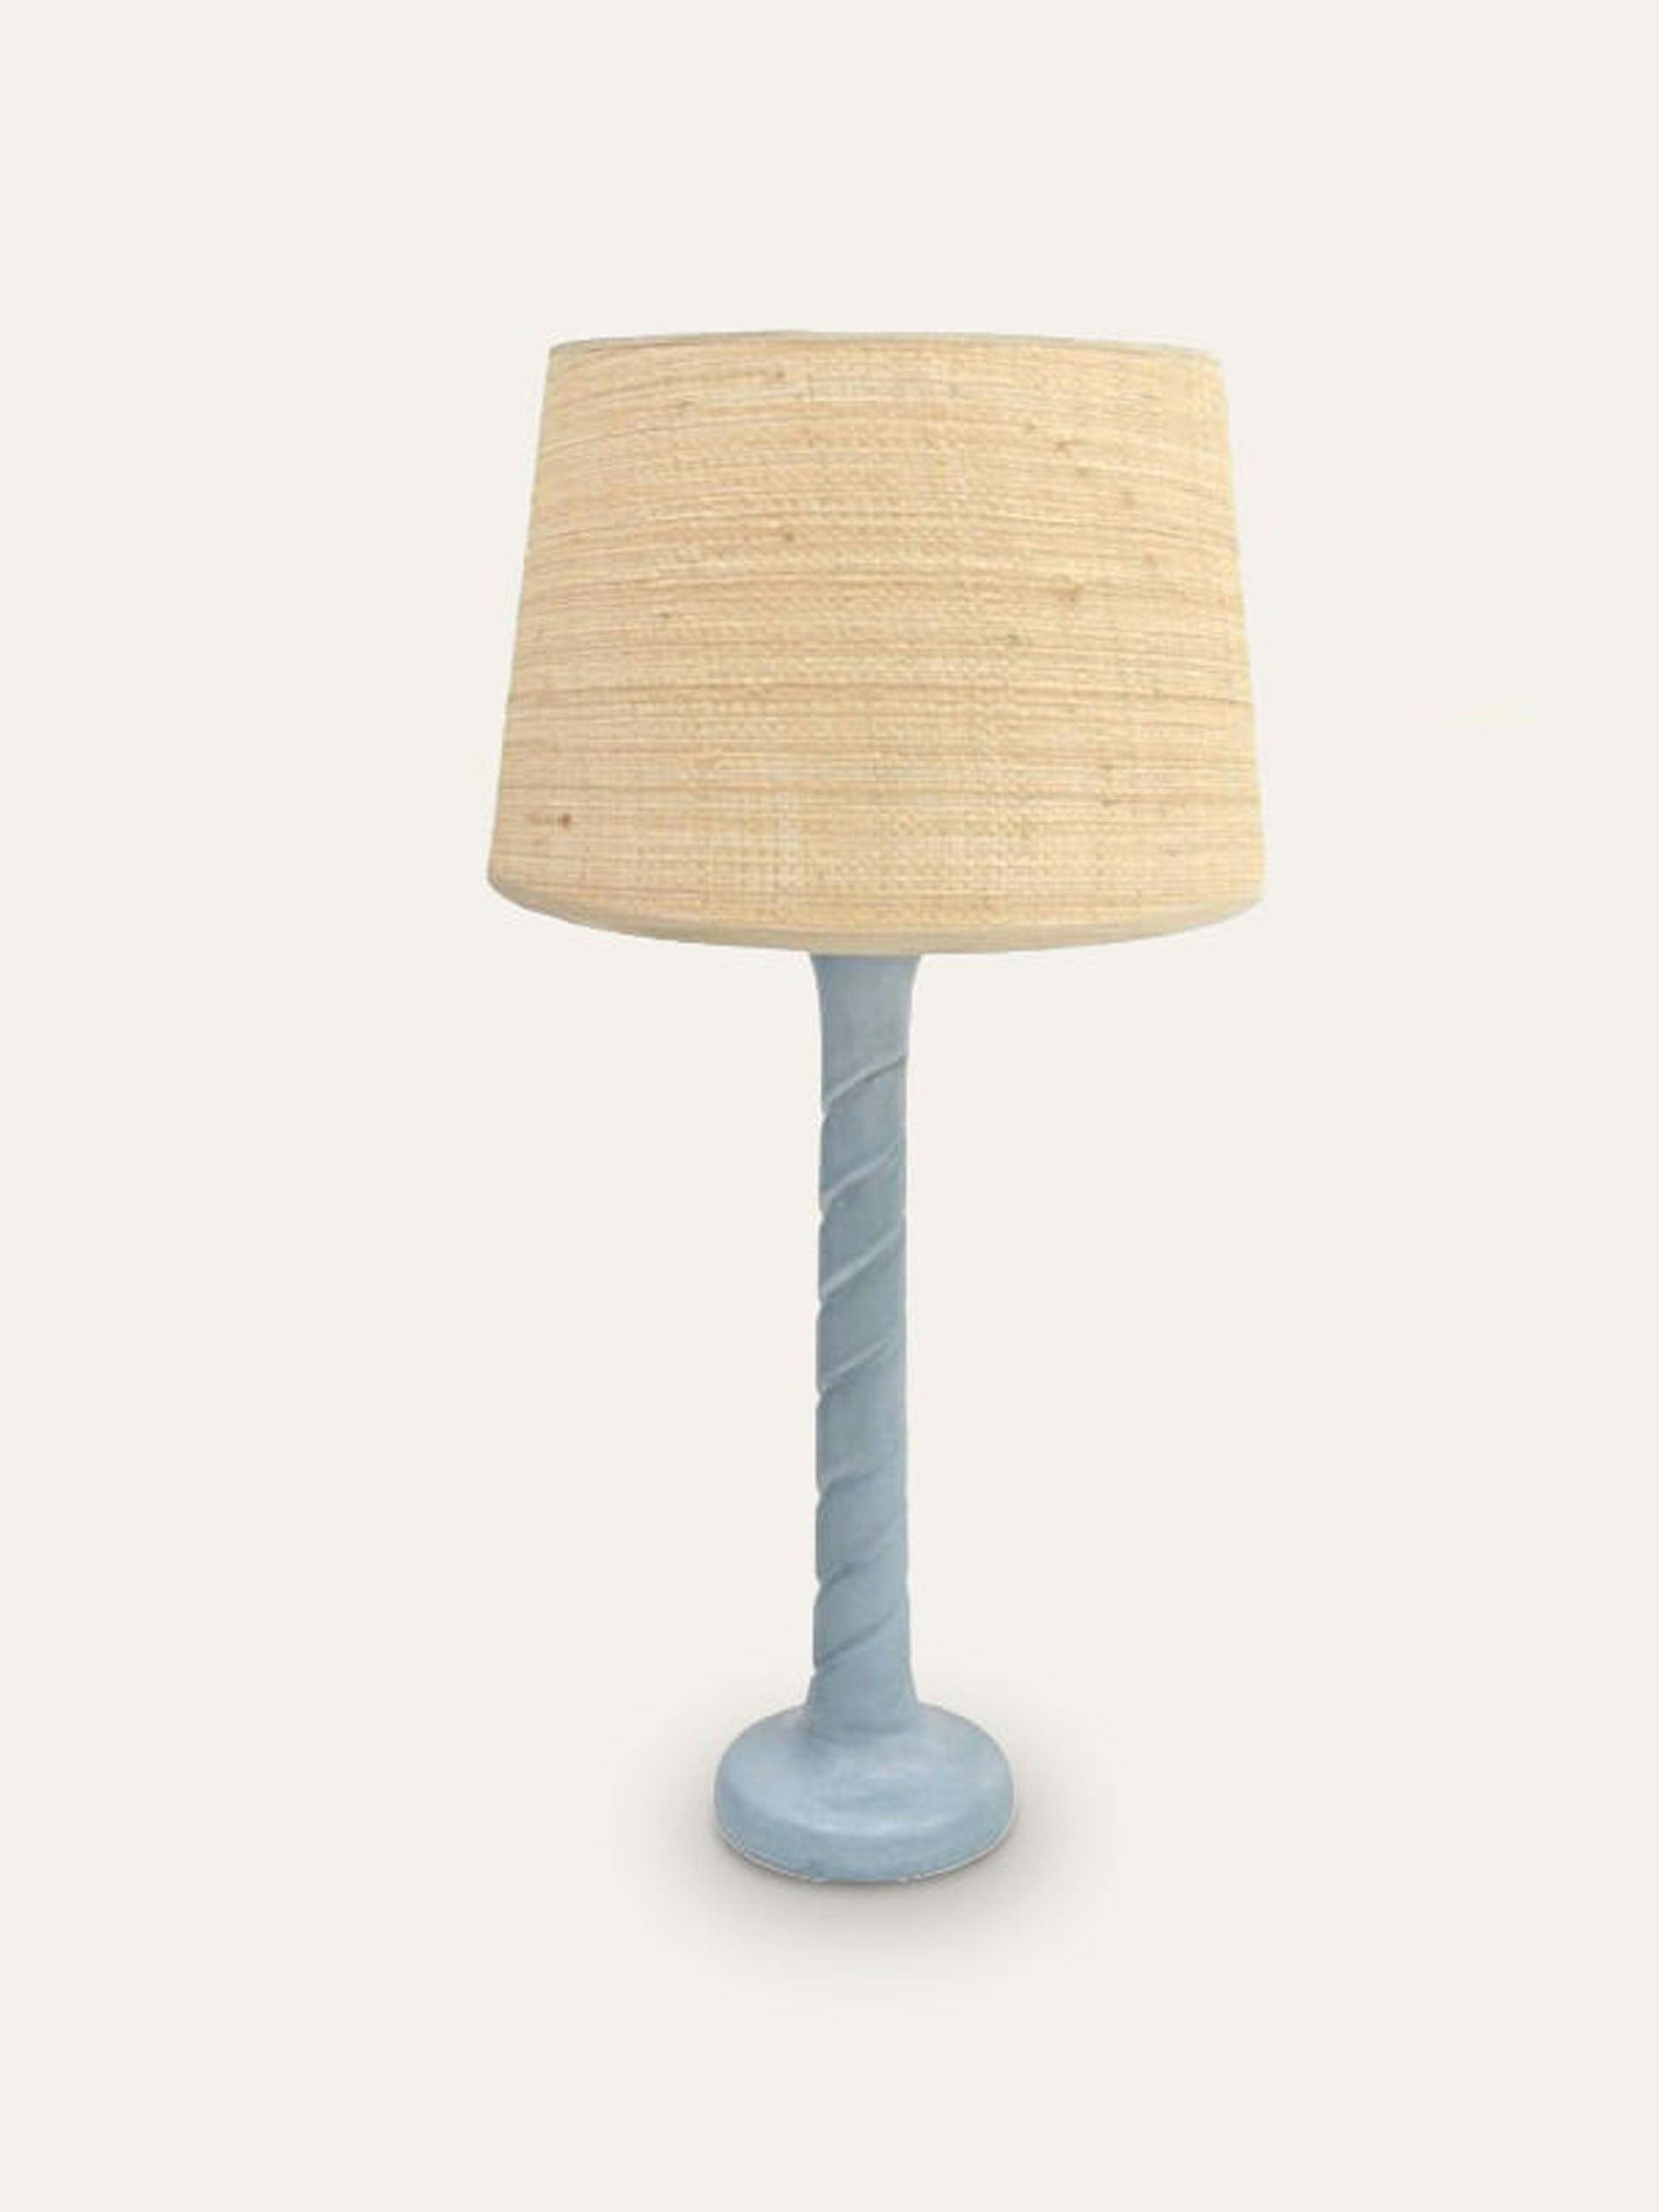 Small light blue twisted wooden table lamp